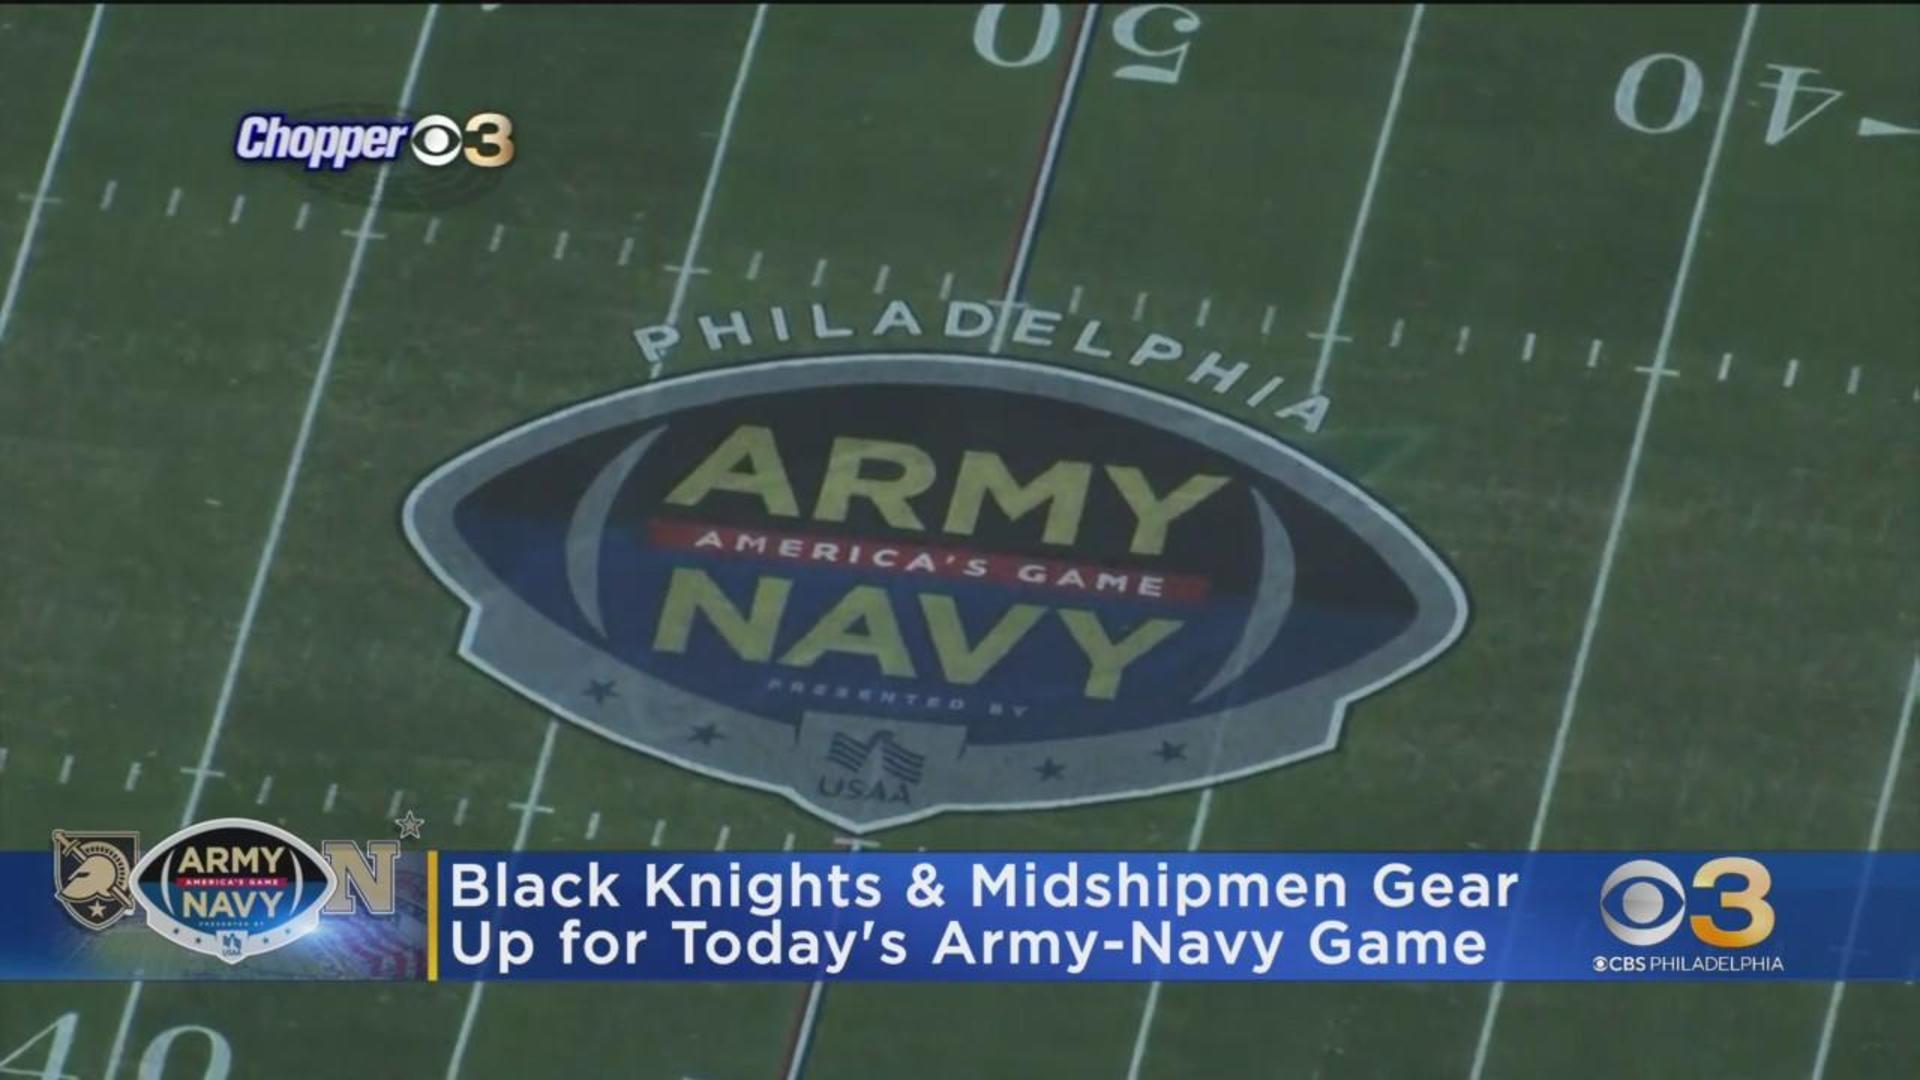 Philadelphia gears up for last Army-Navy game for awhile